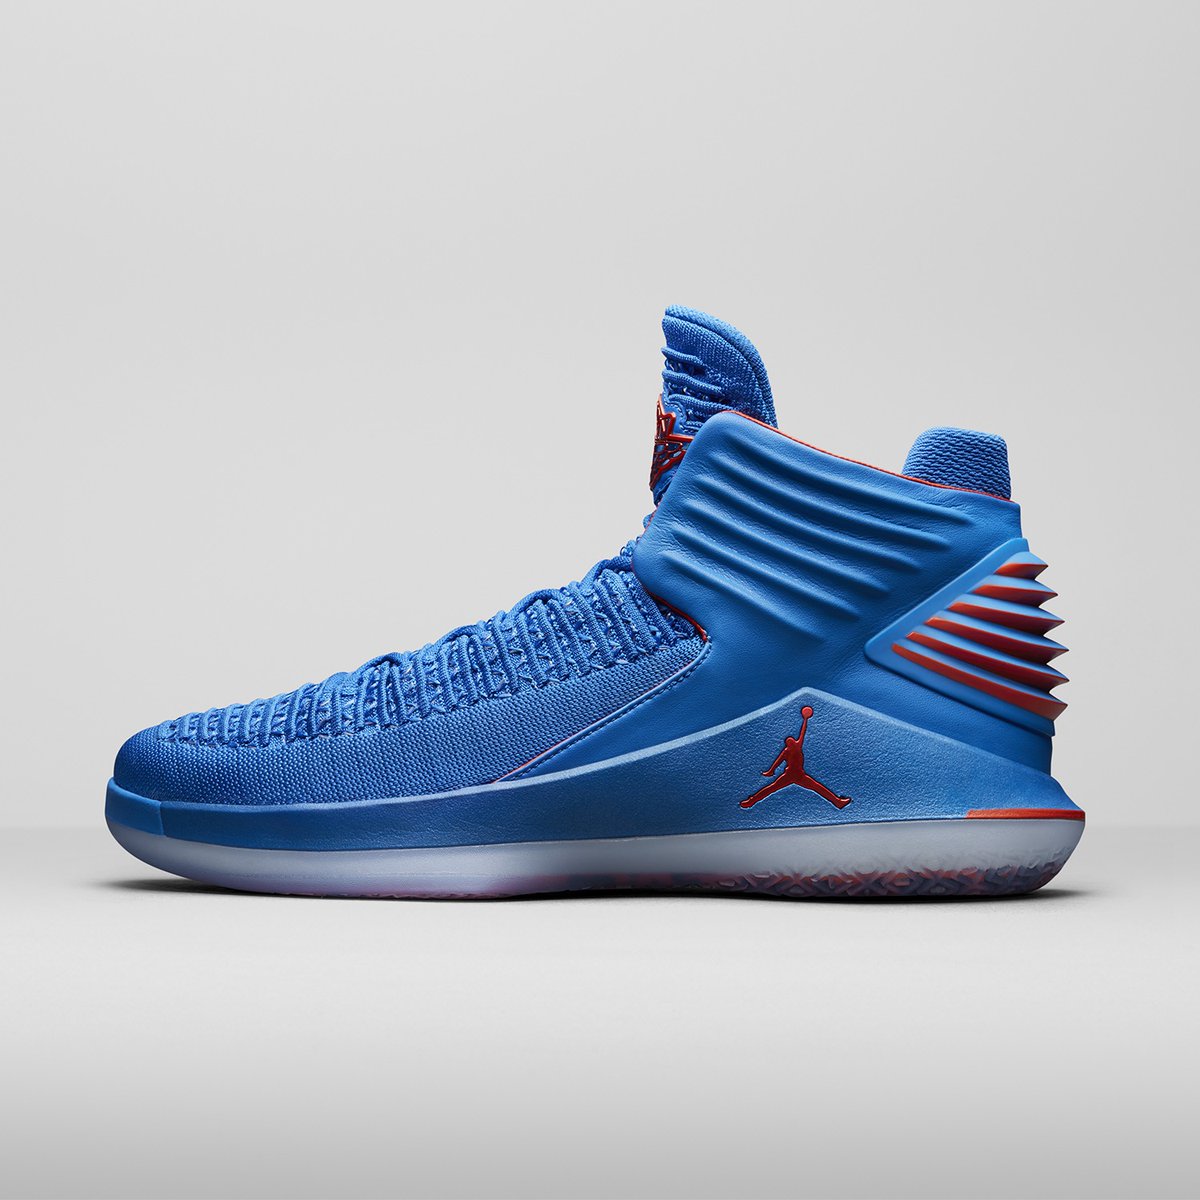 russell westbrook shoes blue